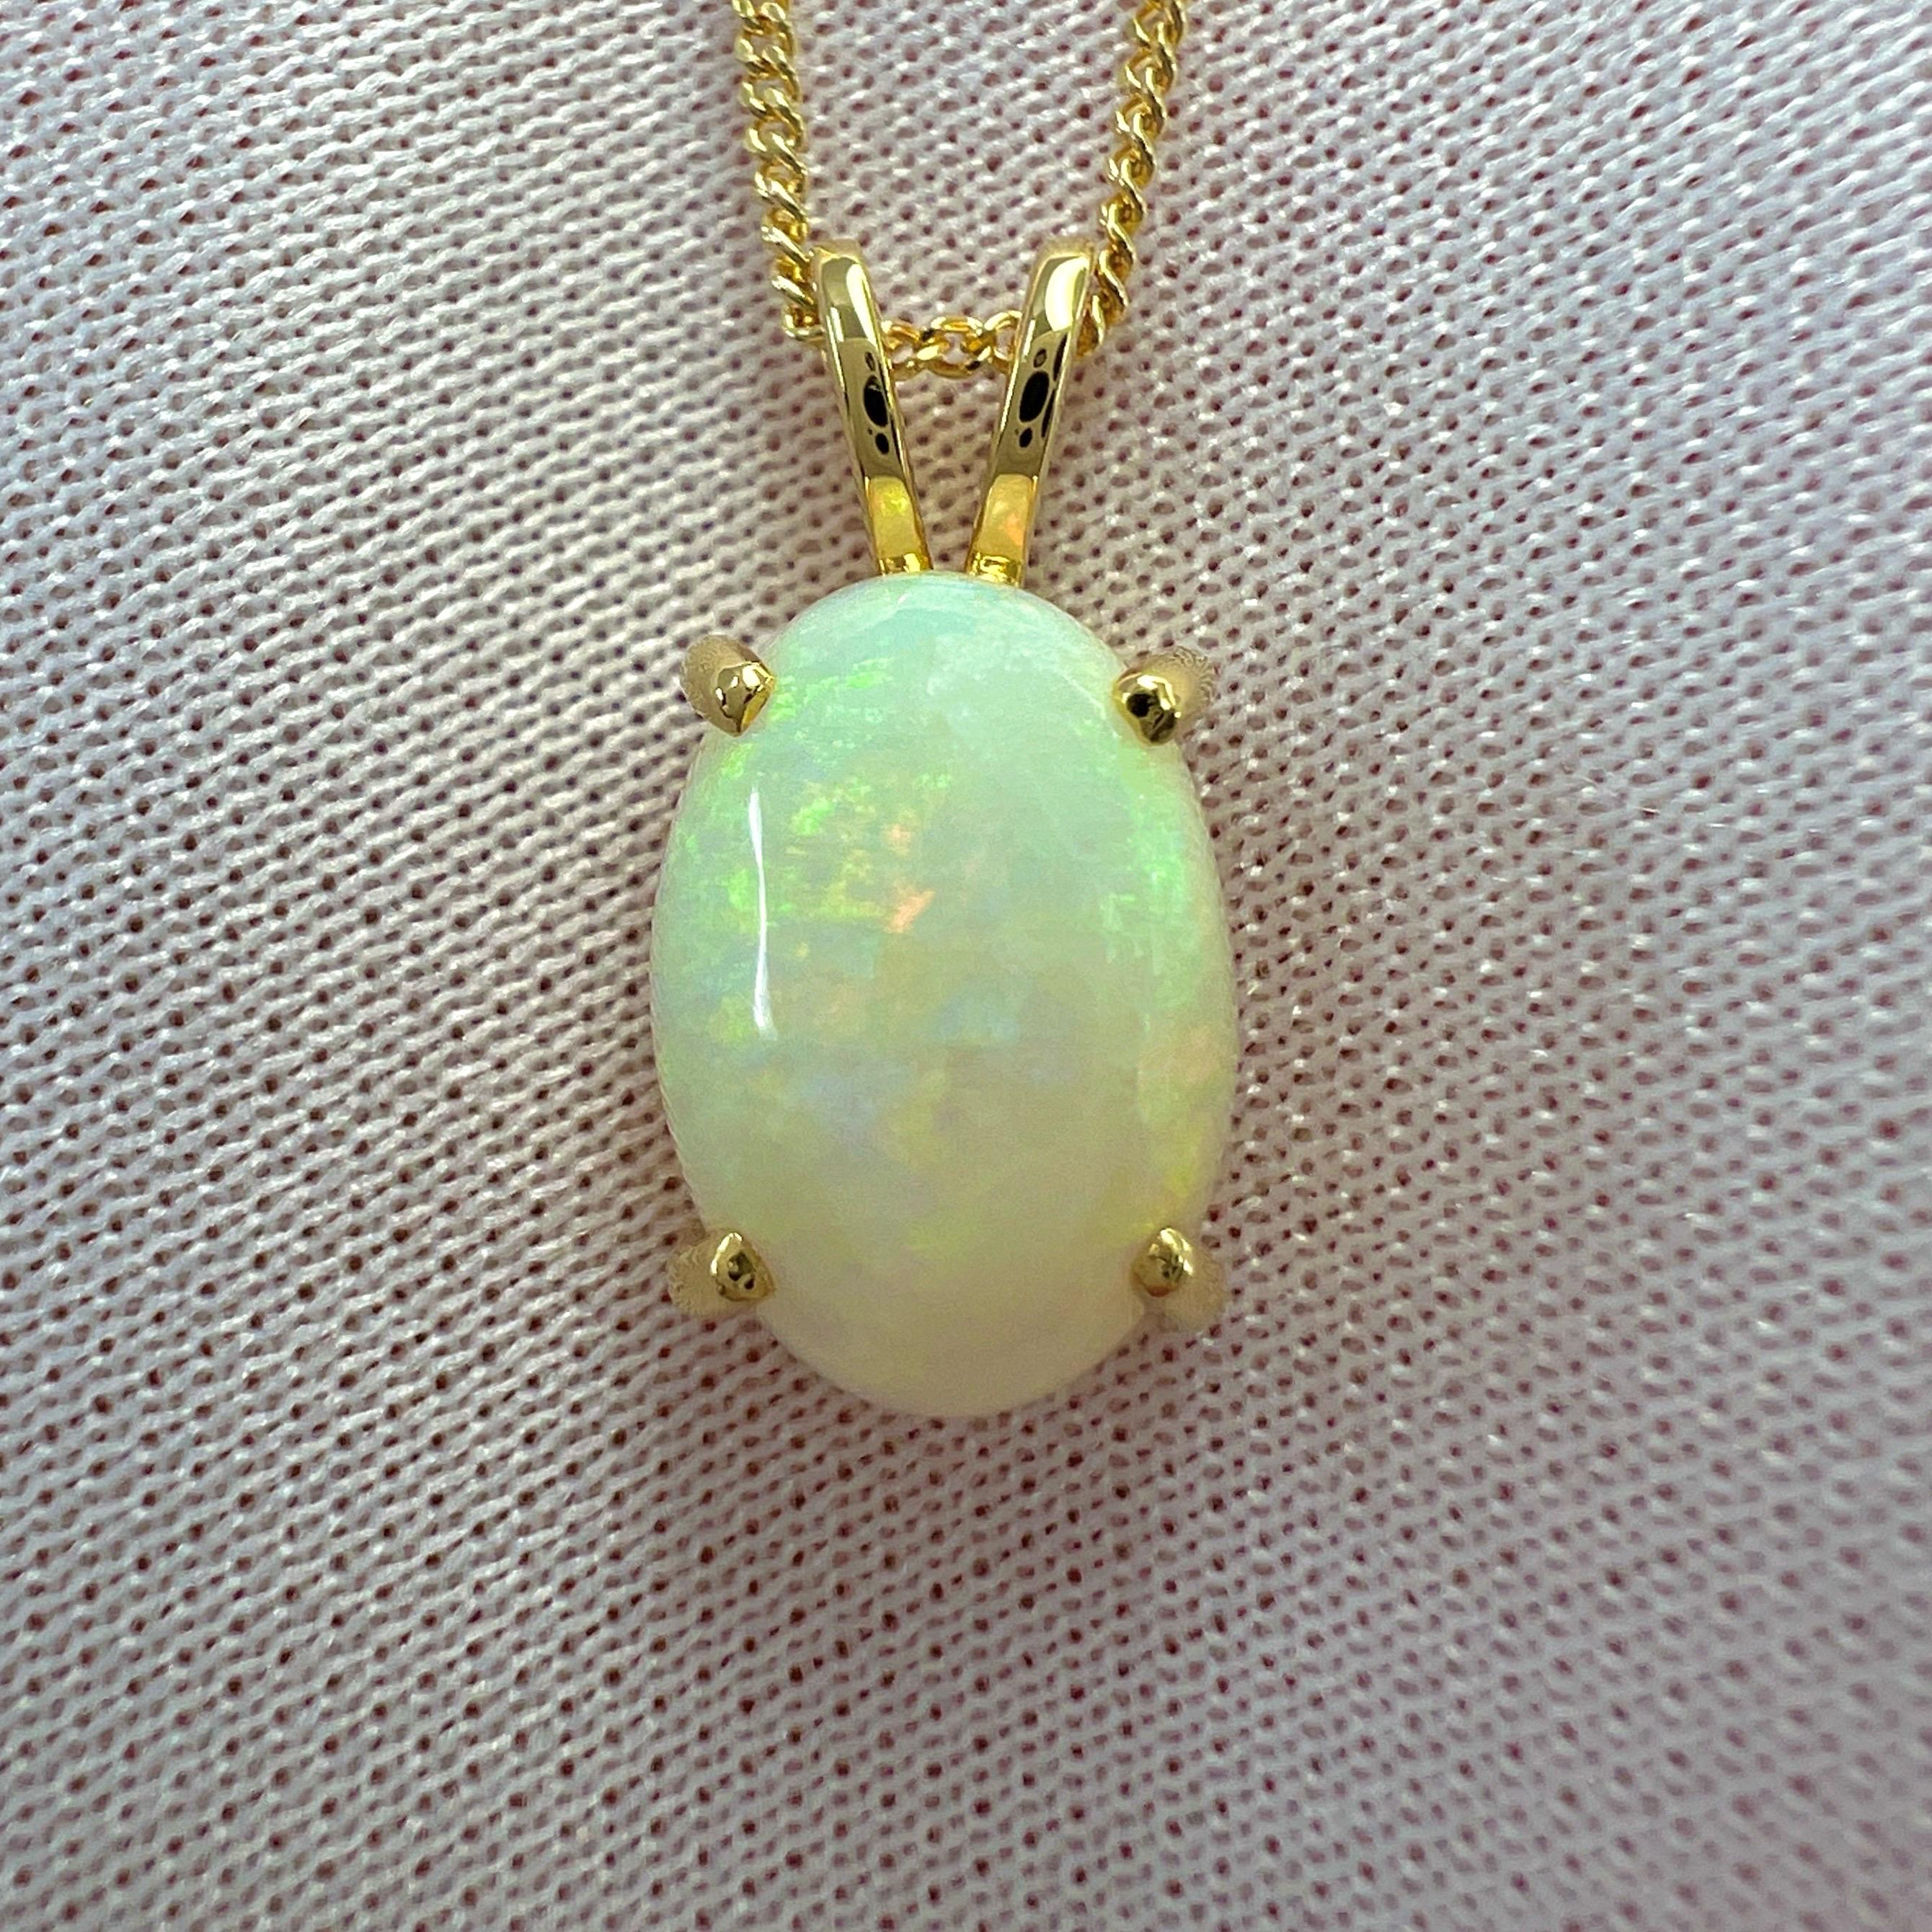 3ct Fine Australian White Opal Oval Cabochon 18k Yellow Gold Pendant Necklace For Sale 4